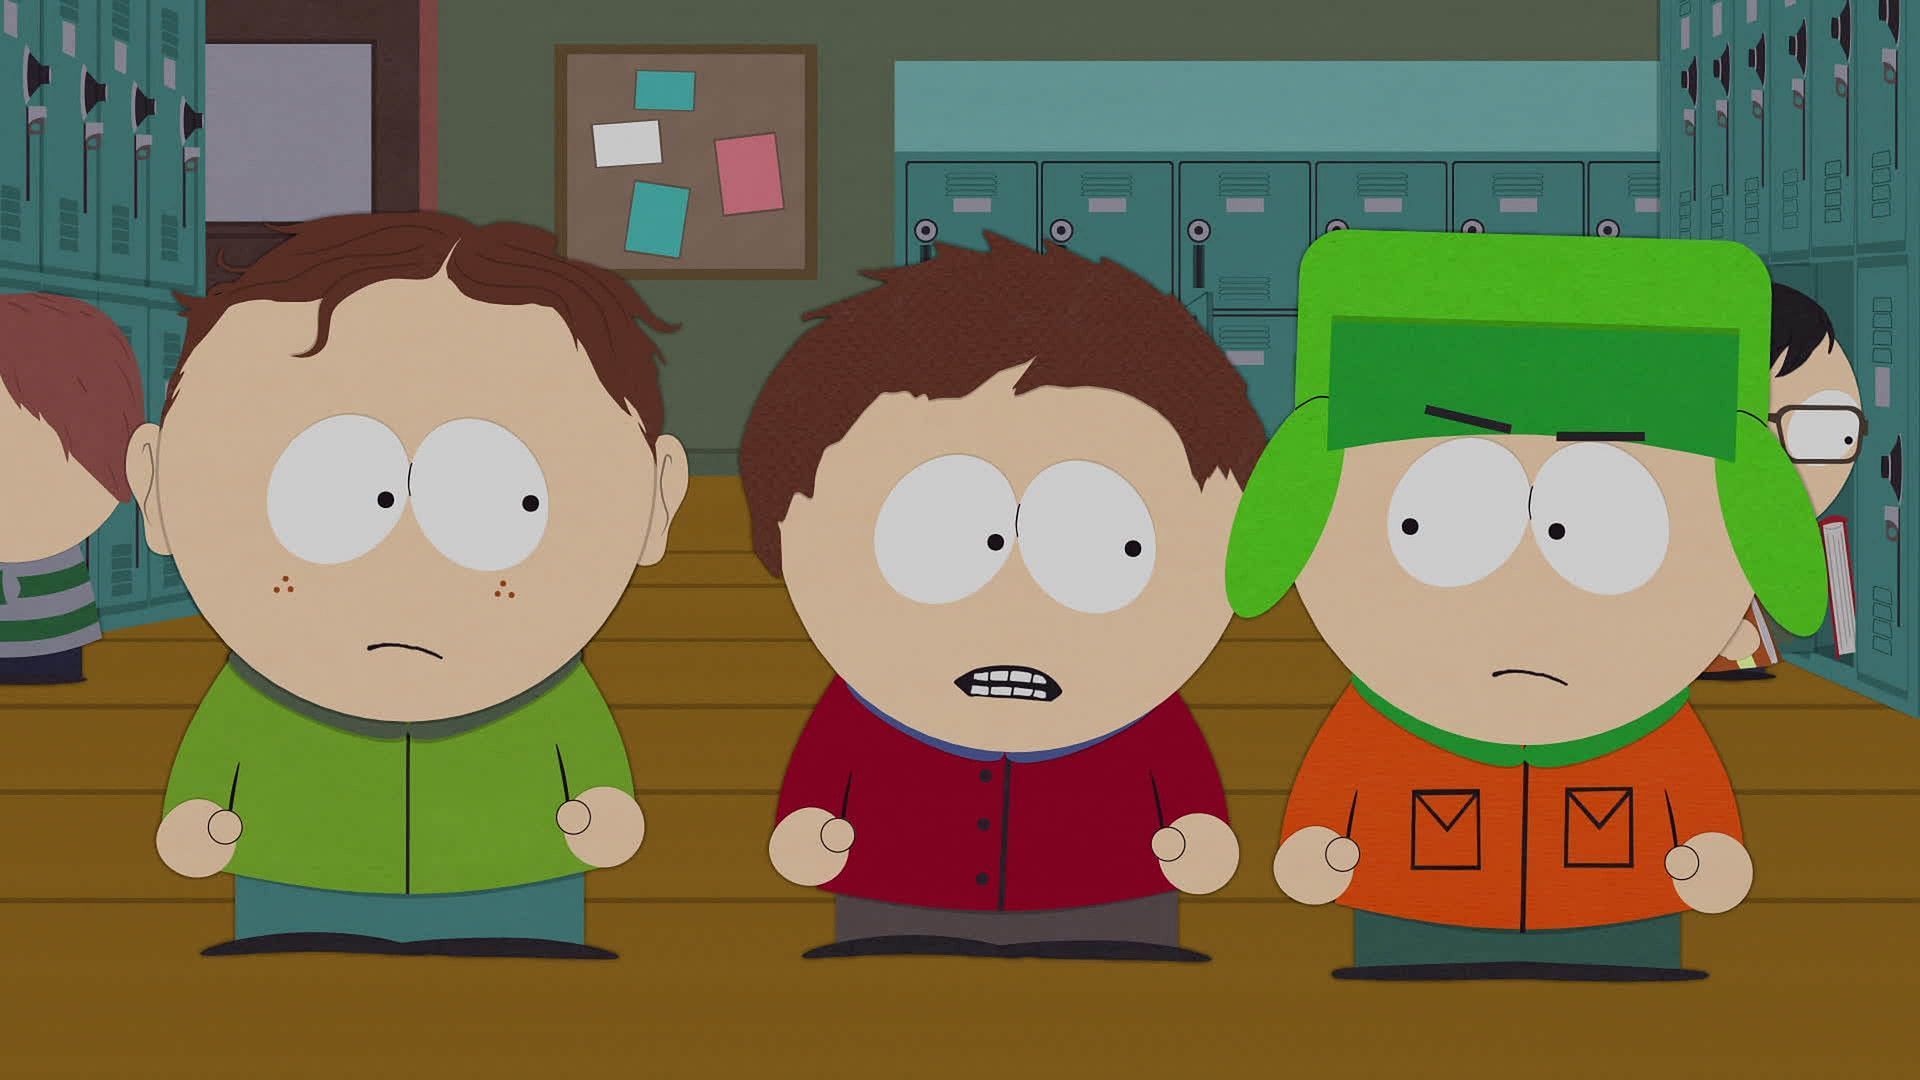 South Park Season 26 Episode 5 to air on March 22, 2023 (Image via Comedy Partners/Comedy Central)